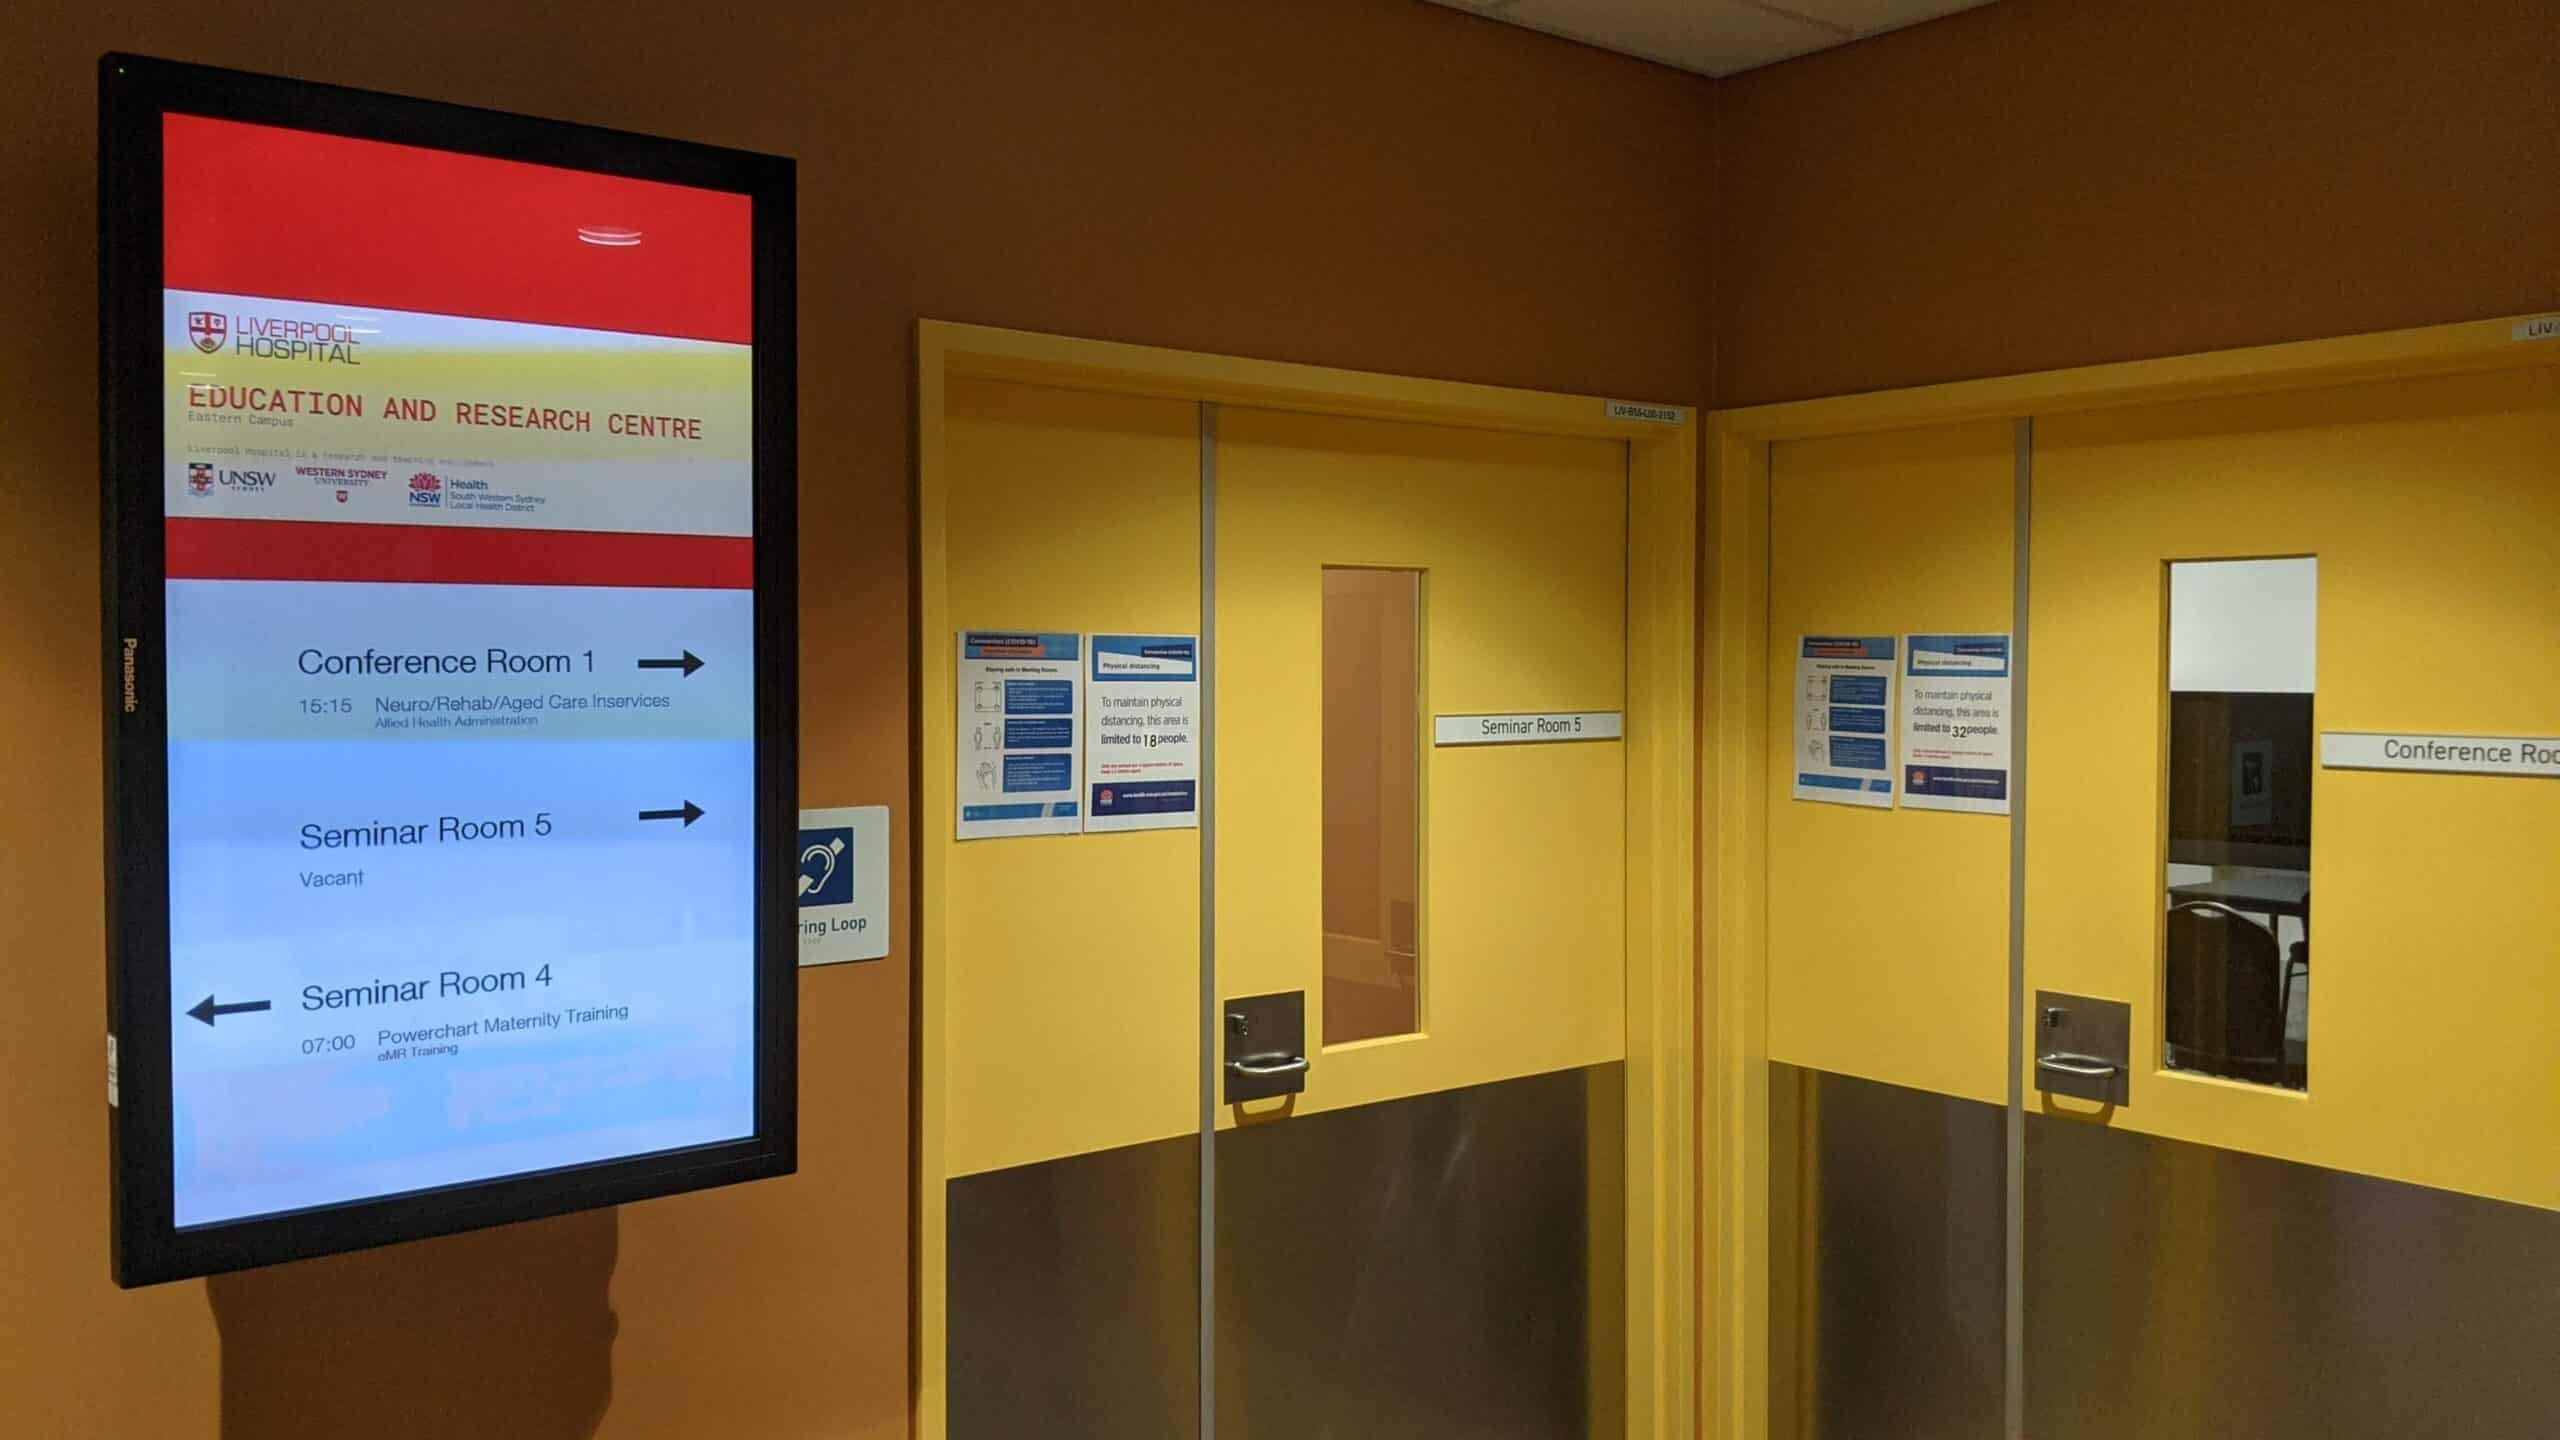 Digital Wayfinding – Liverpool Hospital Education and Research Centre